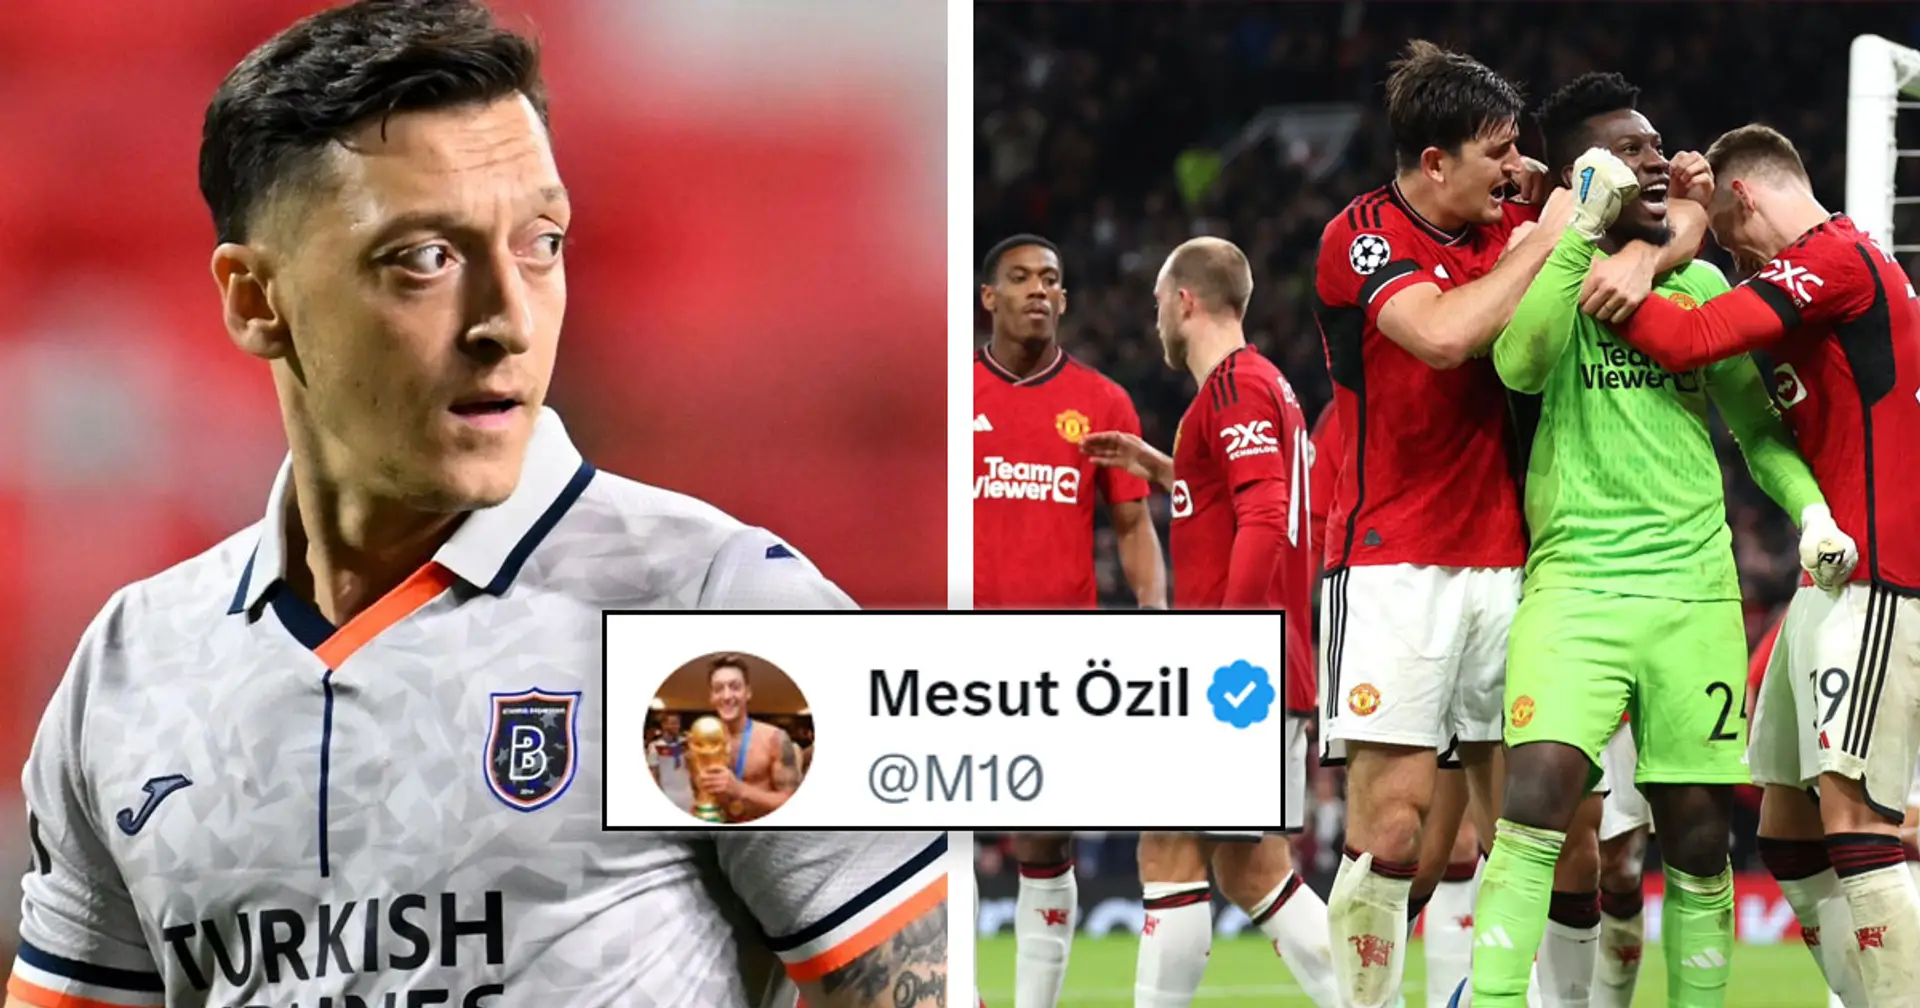 'Silencing the haters': Mesut Ozil shows support for Man United duo after Copenhagen win